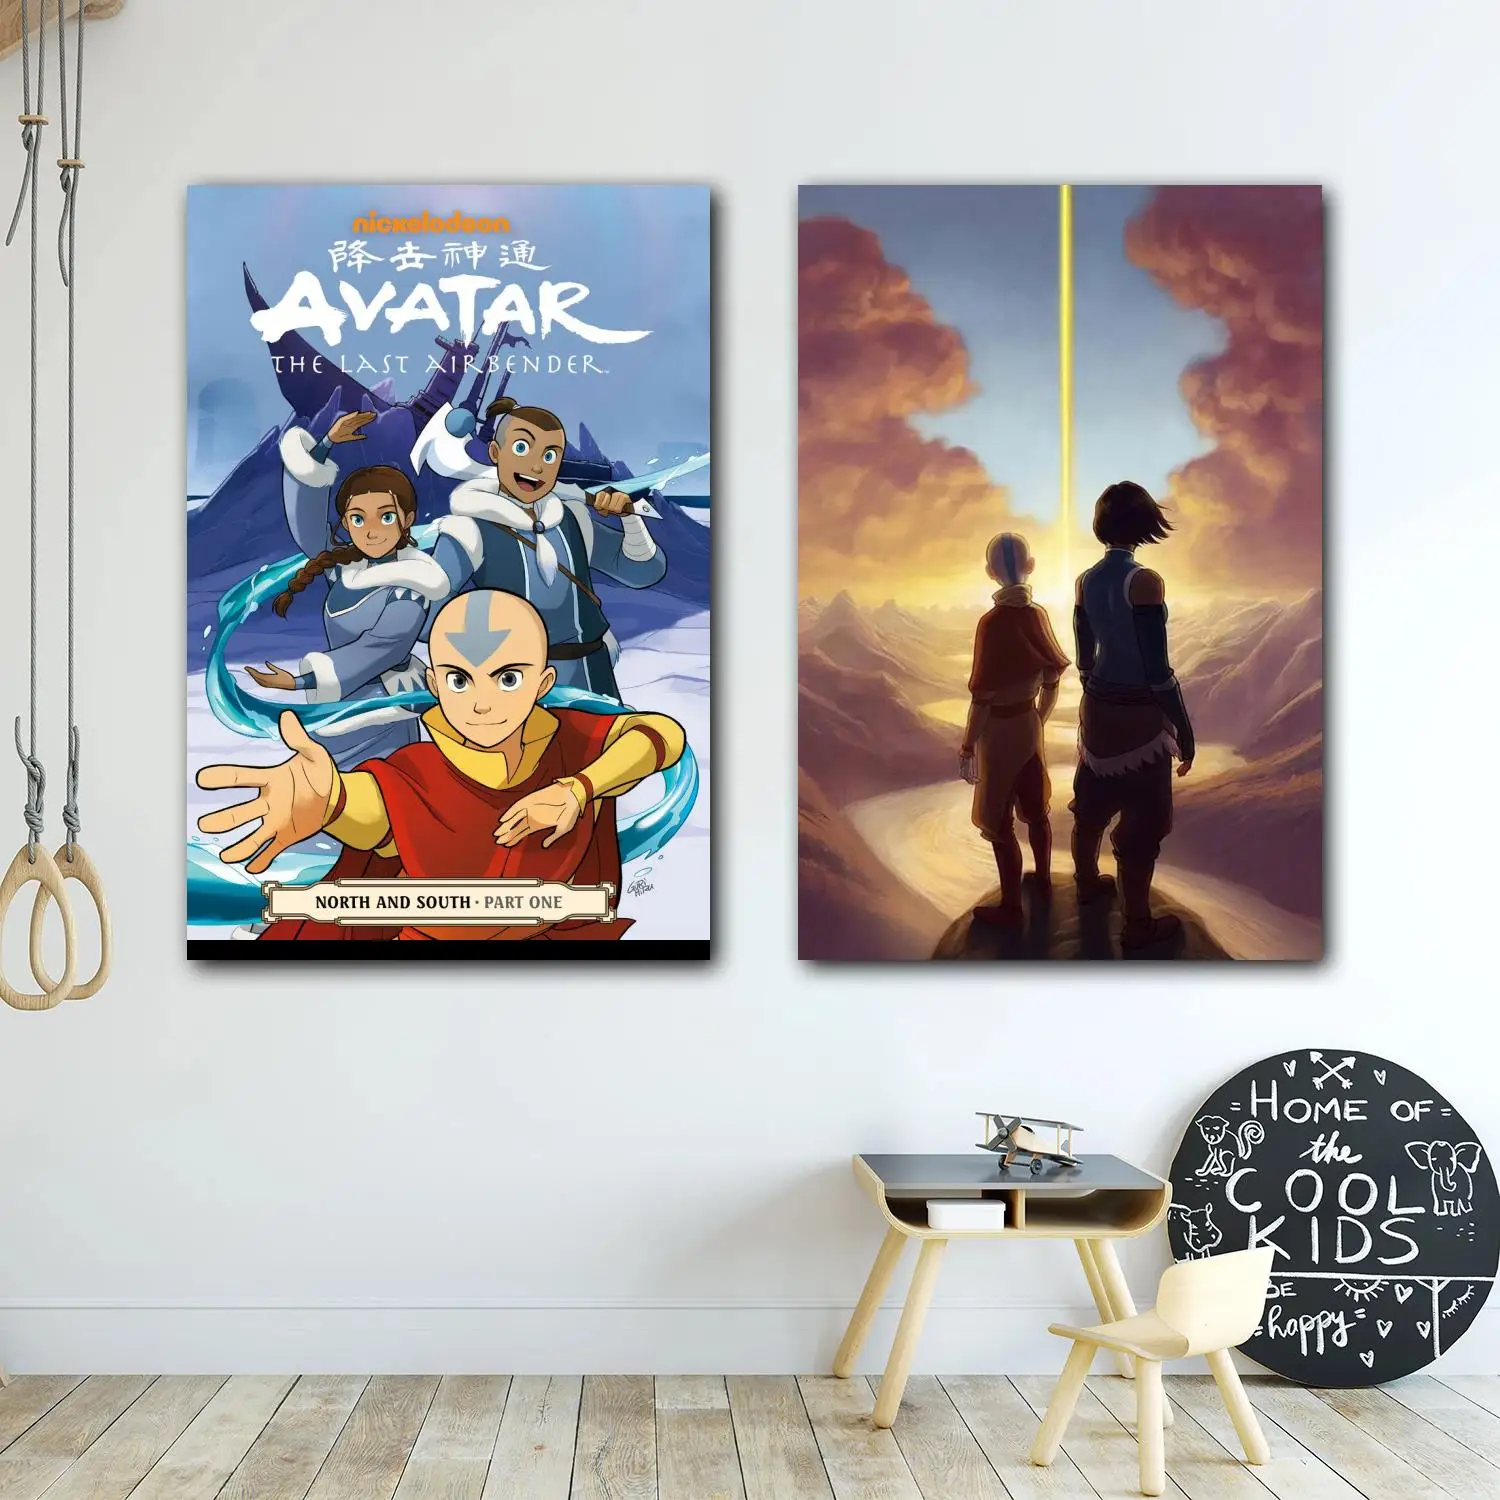 

the last airbender Movie Decorative Canvas 24x36 Posters Room Bar Cafe Decor Gift Print Art Wall Paintings